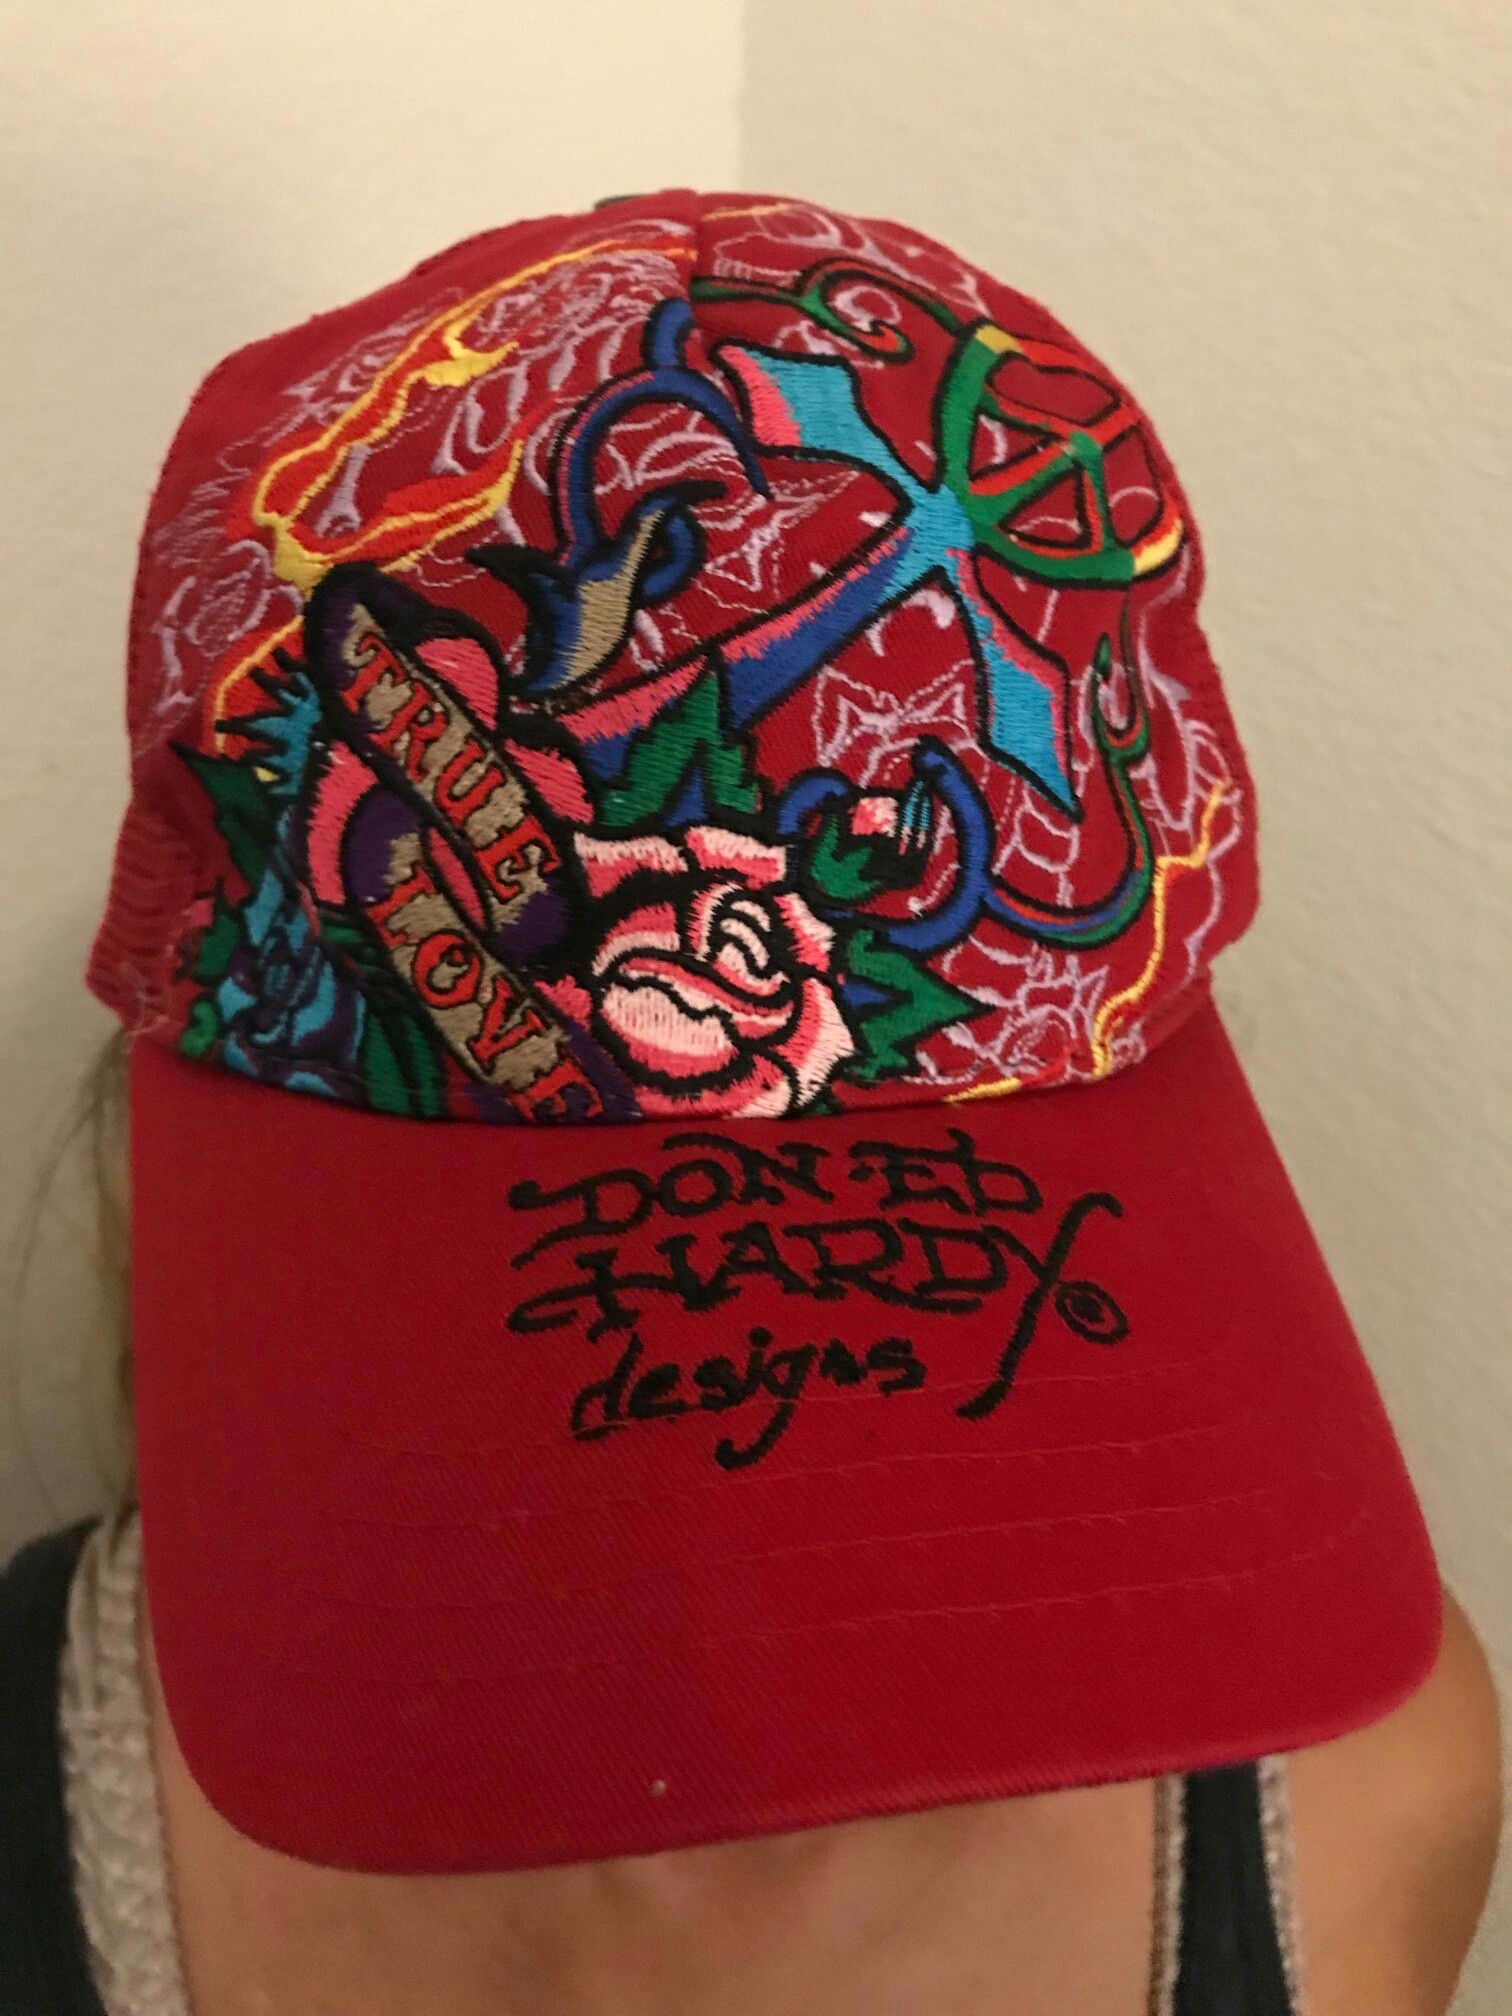 Don-Ed hardy designs hat like New